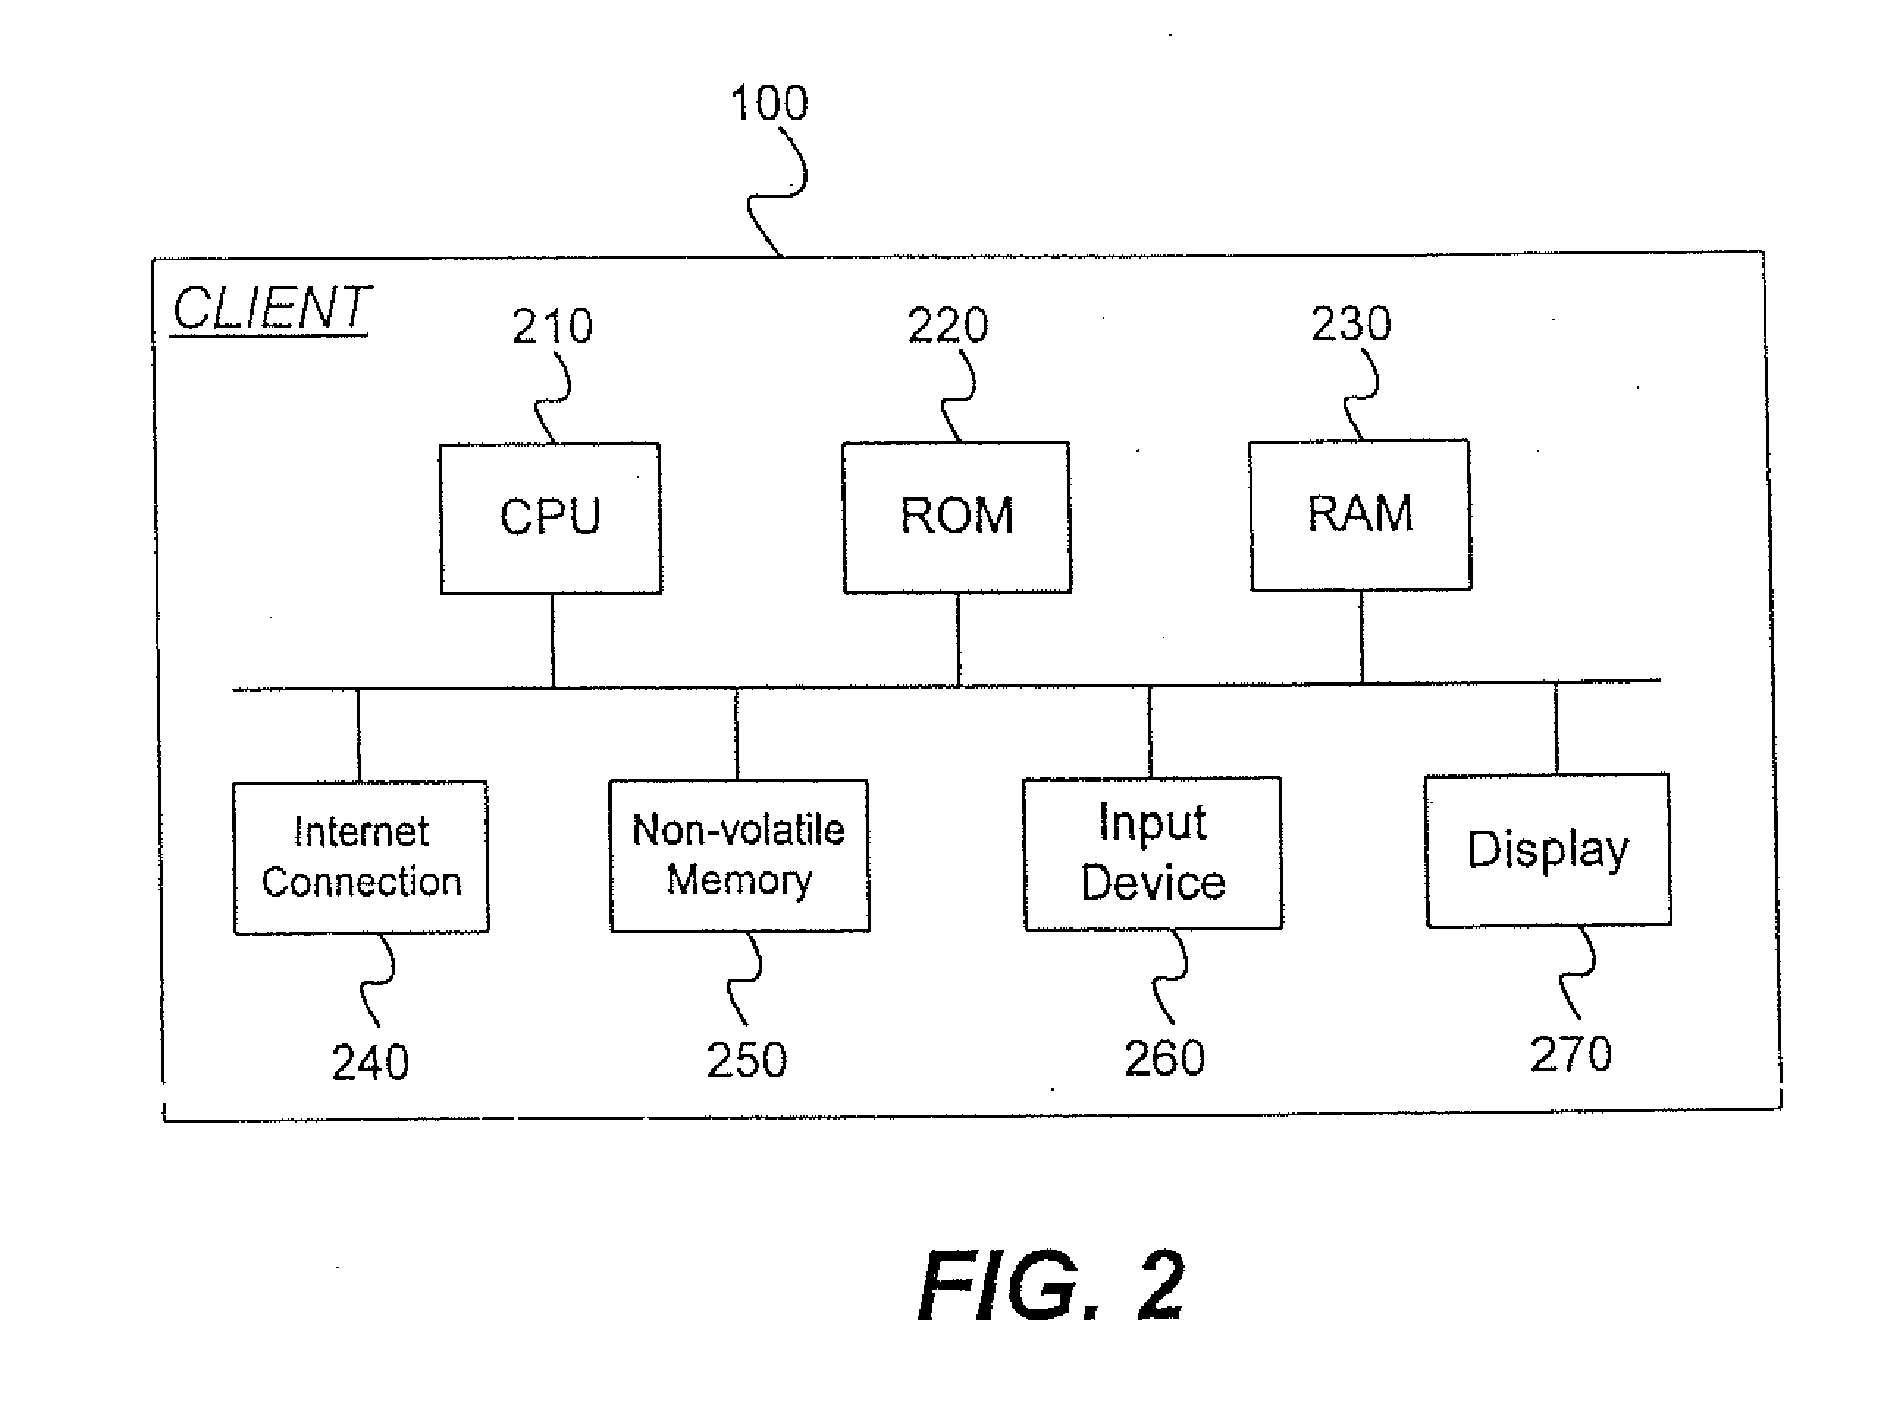 System and Method of a Web Browser with Integrated Features and Controls